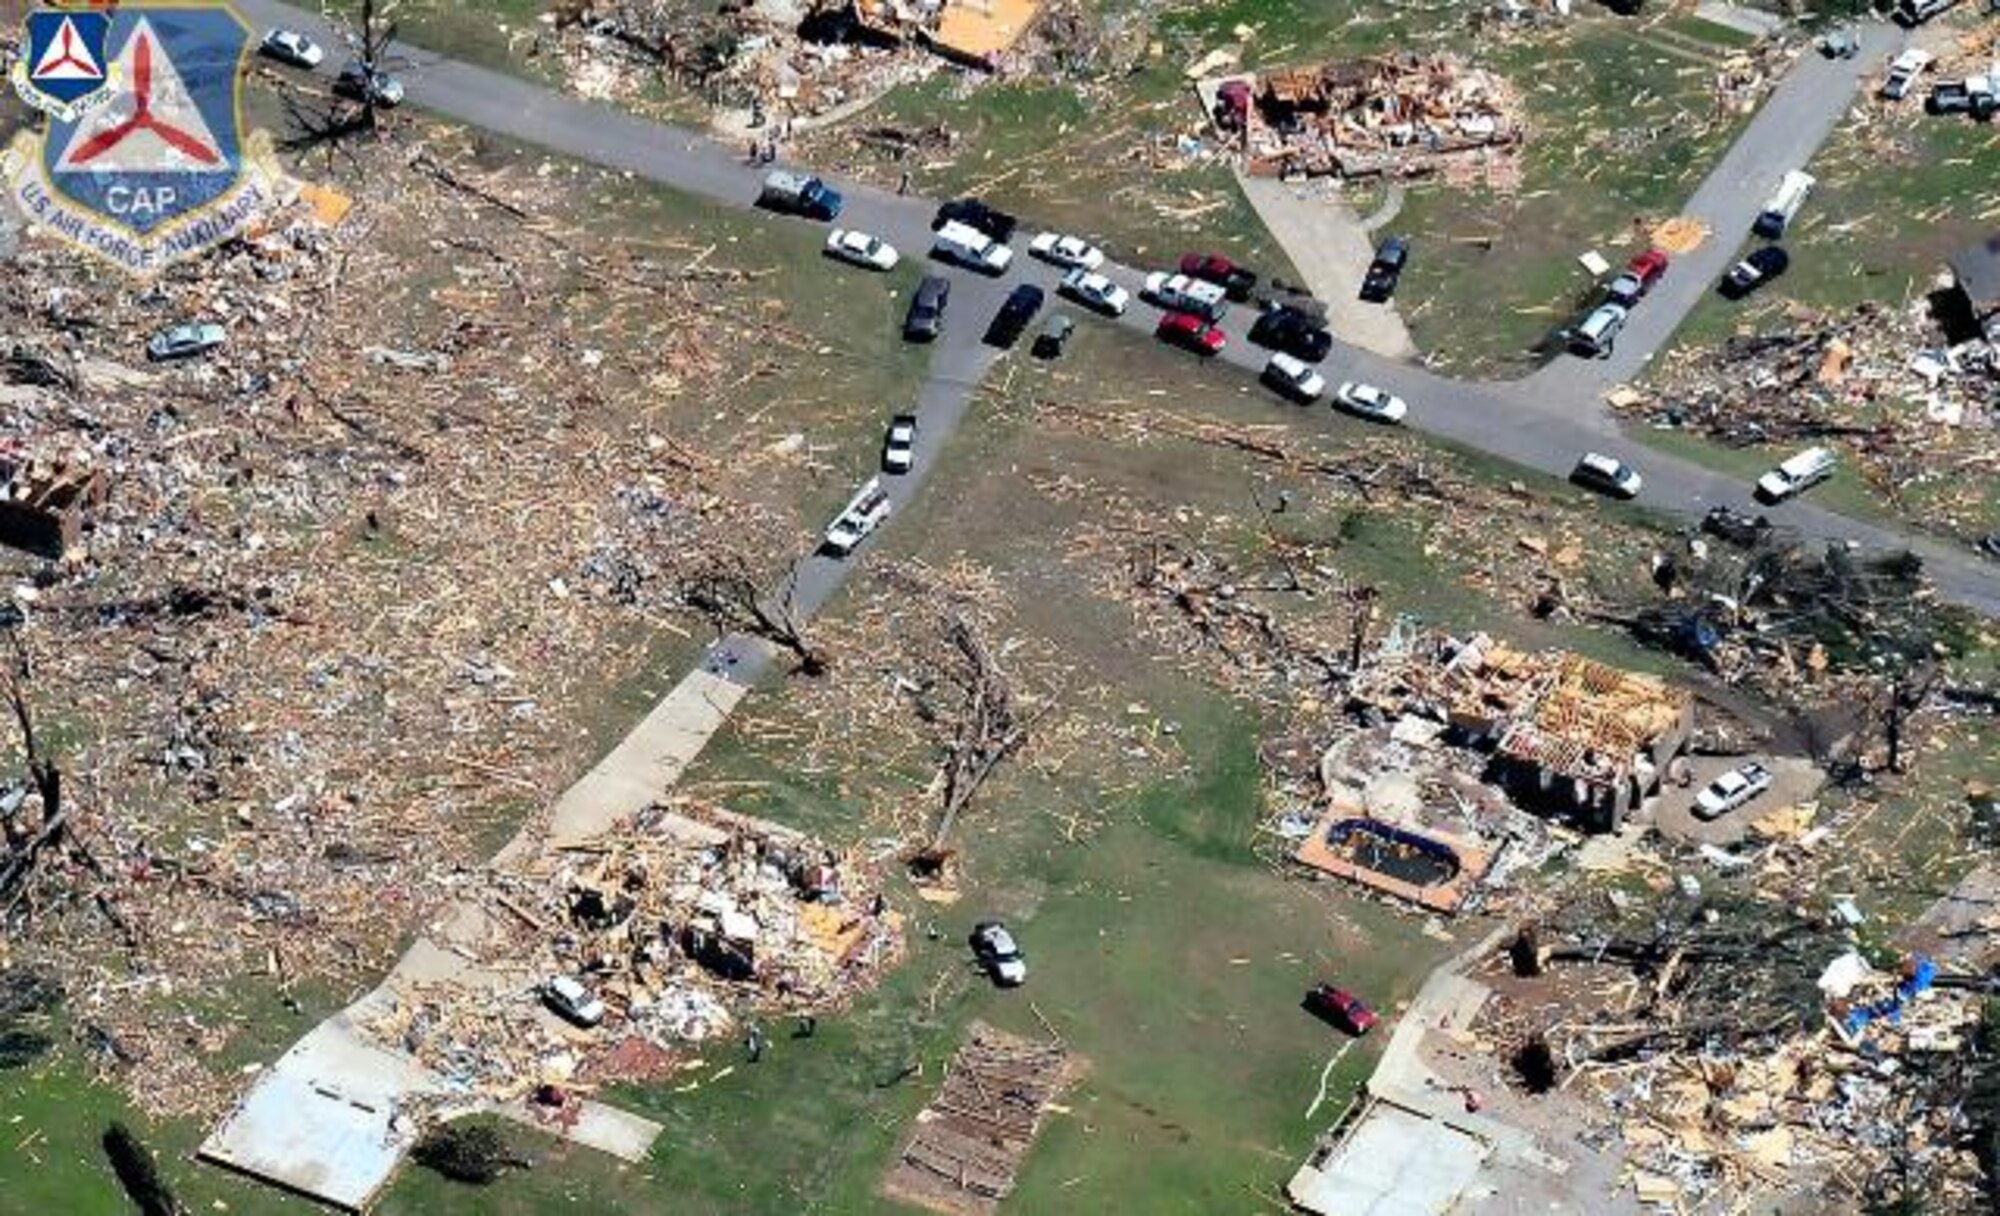 The Civil Air Patrol, flying as the Air Force Auxiliary, took this image in Jefferson County in Alabama April 29. Tornadoes devastated the Southeast April 27, killing more than 300 people and causing extensive property damage. The AFAUX is flying in support of first responders and state and local officials as they assess the damage to the region. (Courtesy photo)